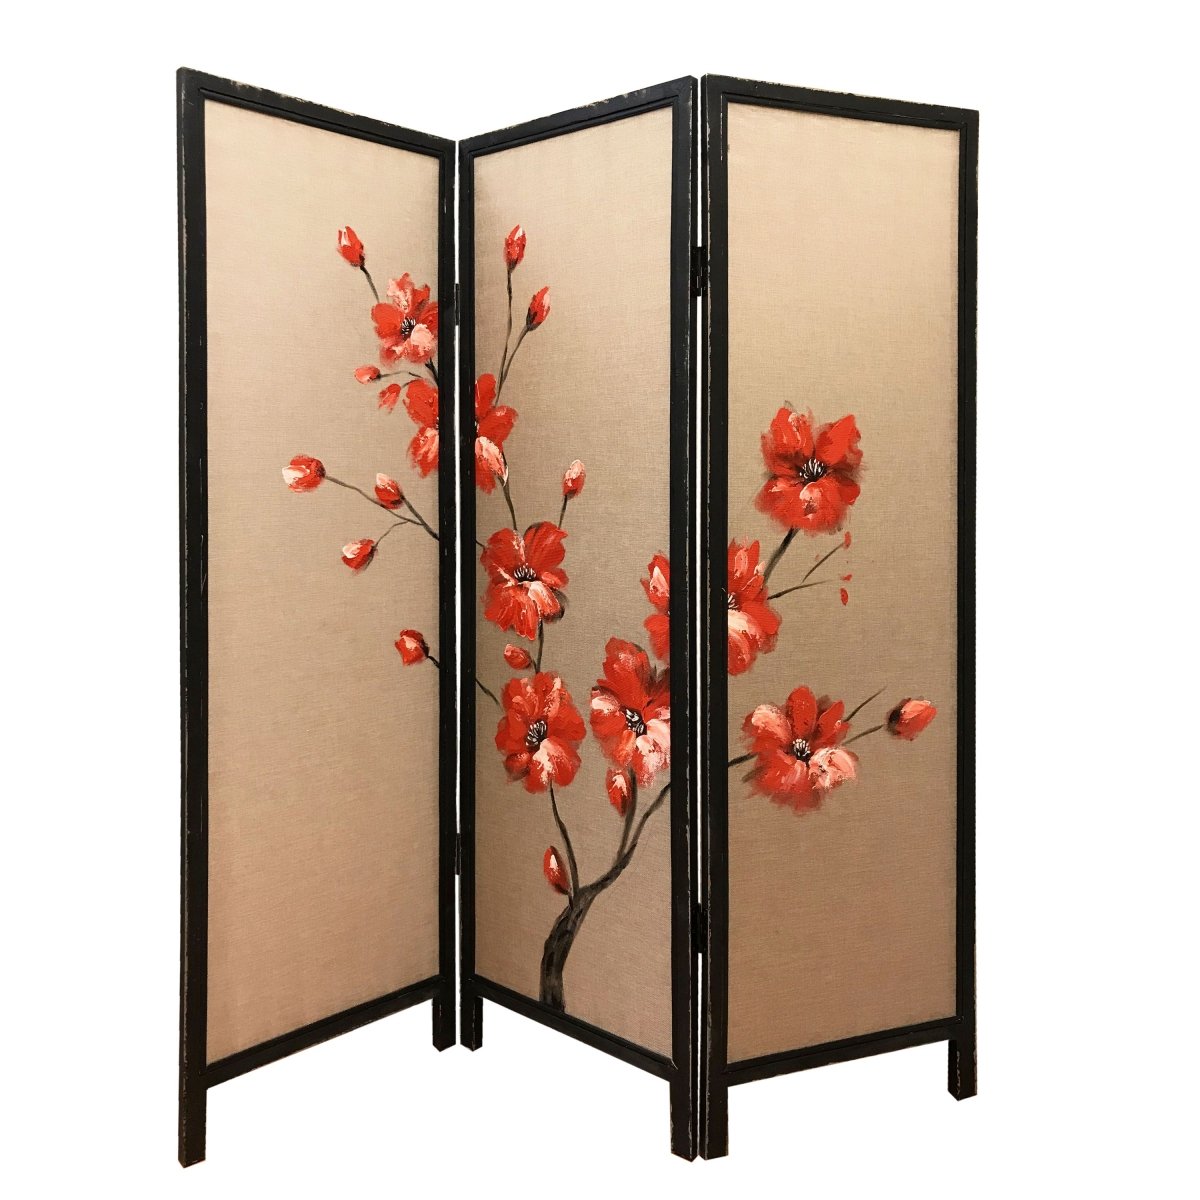 342765 60 X 1 X 63 In. Brown Fabric & Wood Blooming Screen With 3 Panel